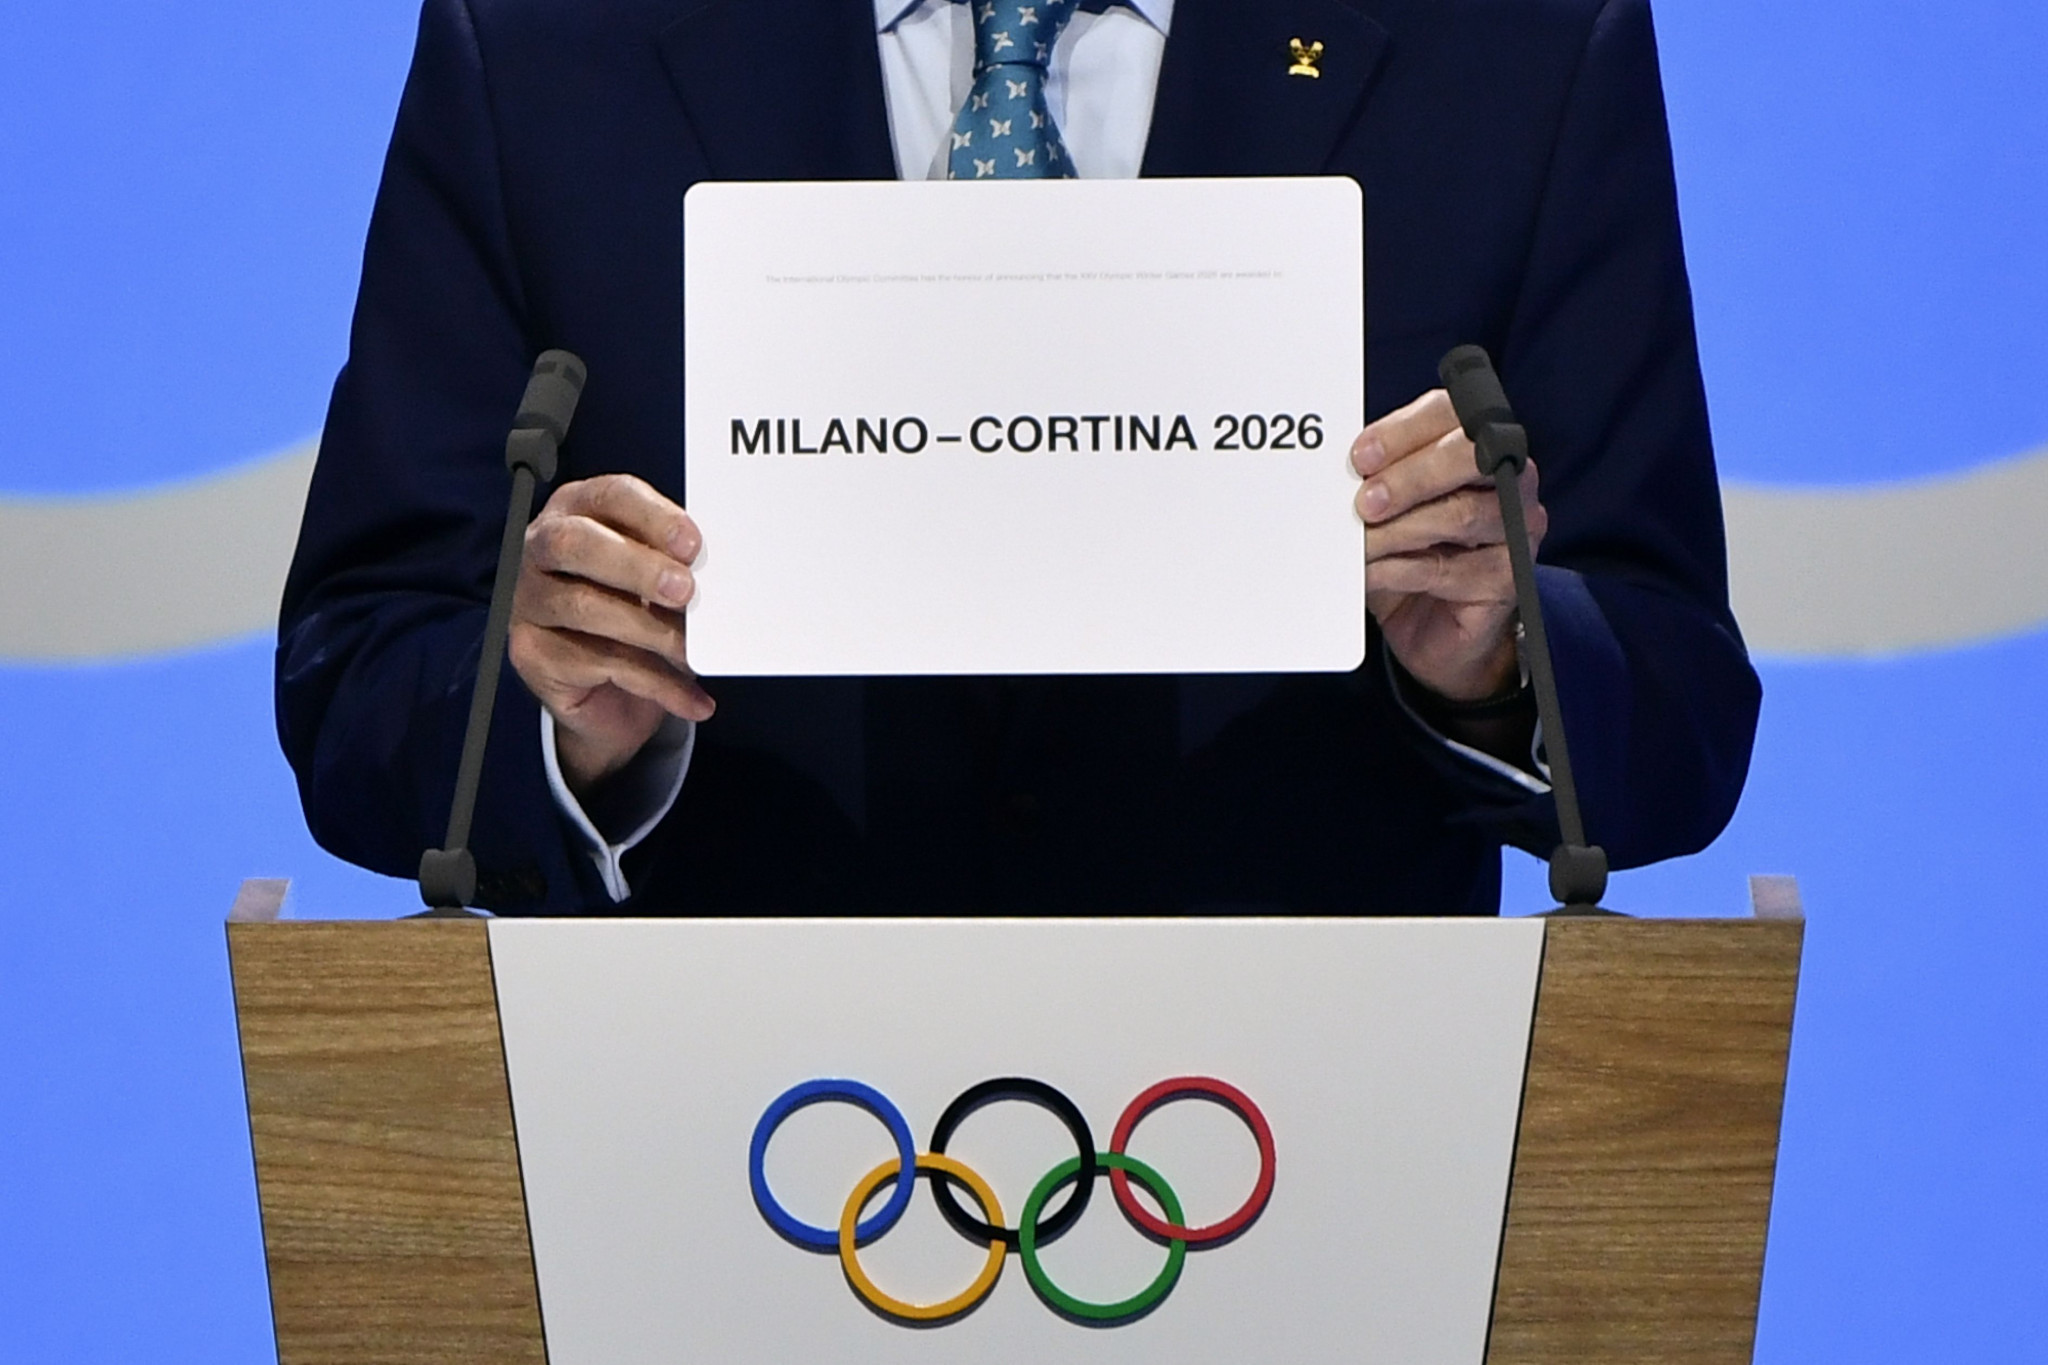 Milan Cortina was awarded the 2026 Winter Olympics under the traditional bidding process after a period of initial dialogue ©Getty Images